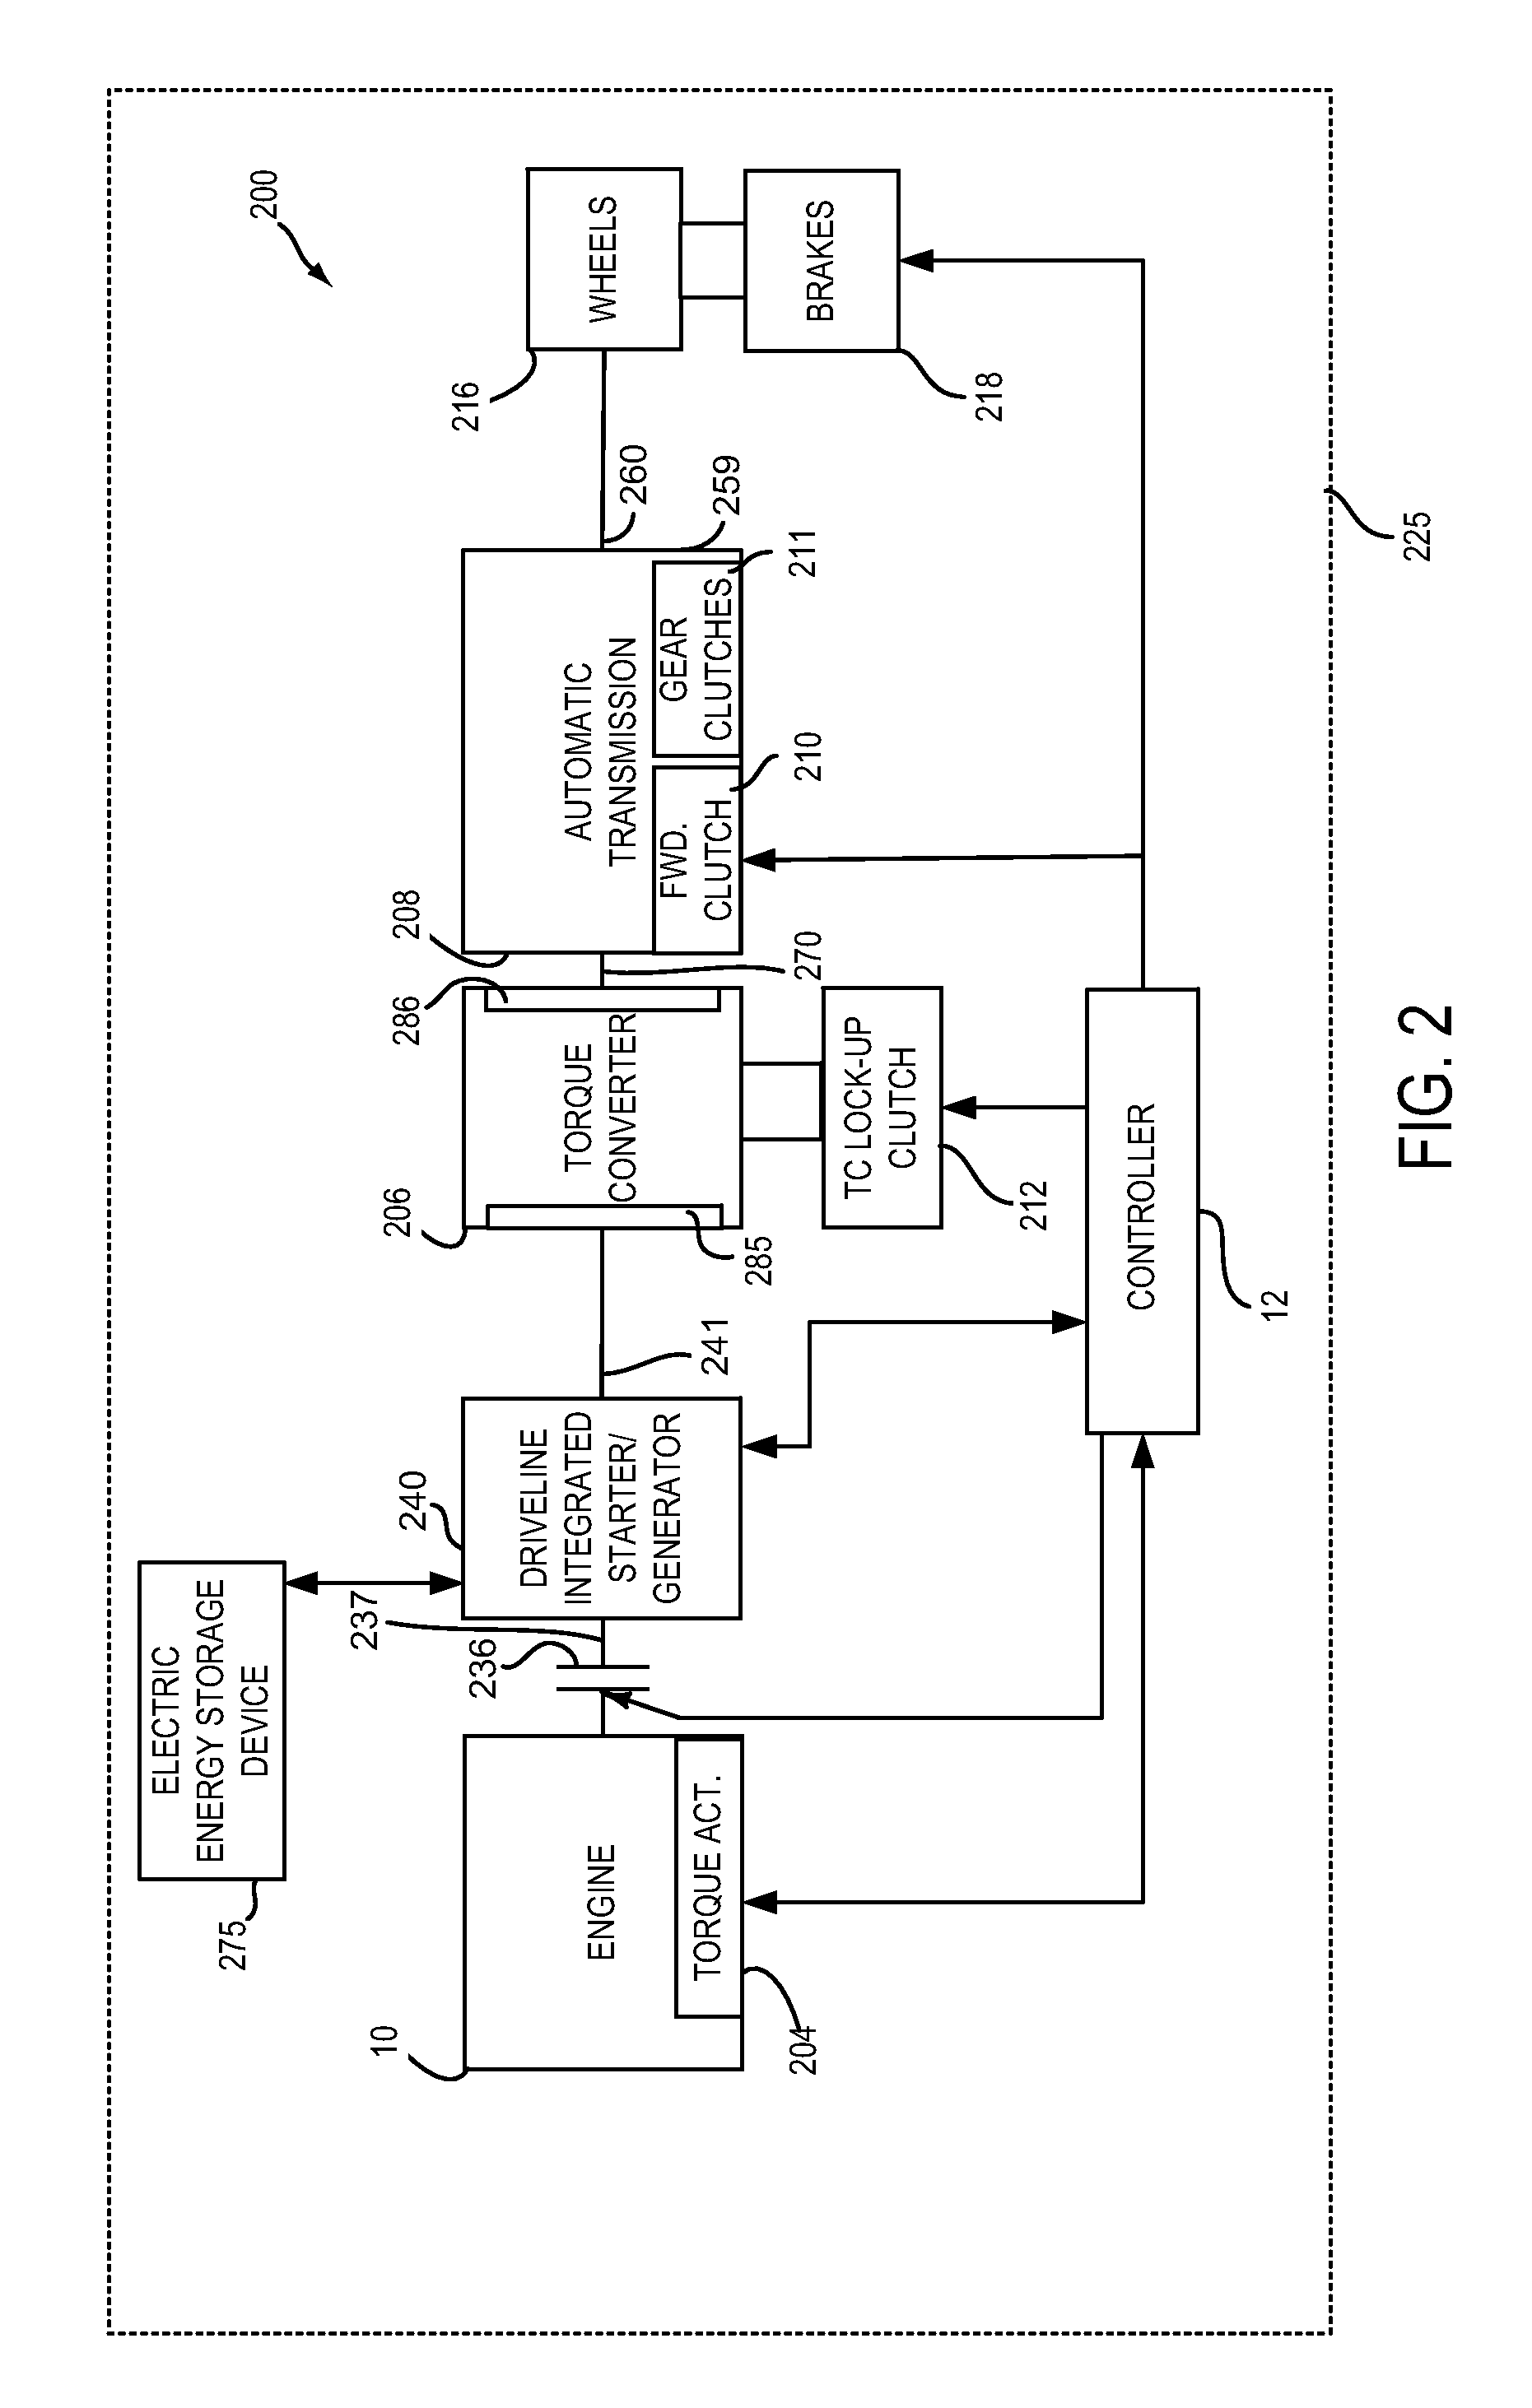 Methods and systems for improving hybrid vehicle performance consistency